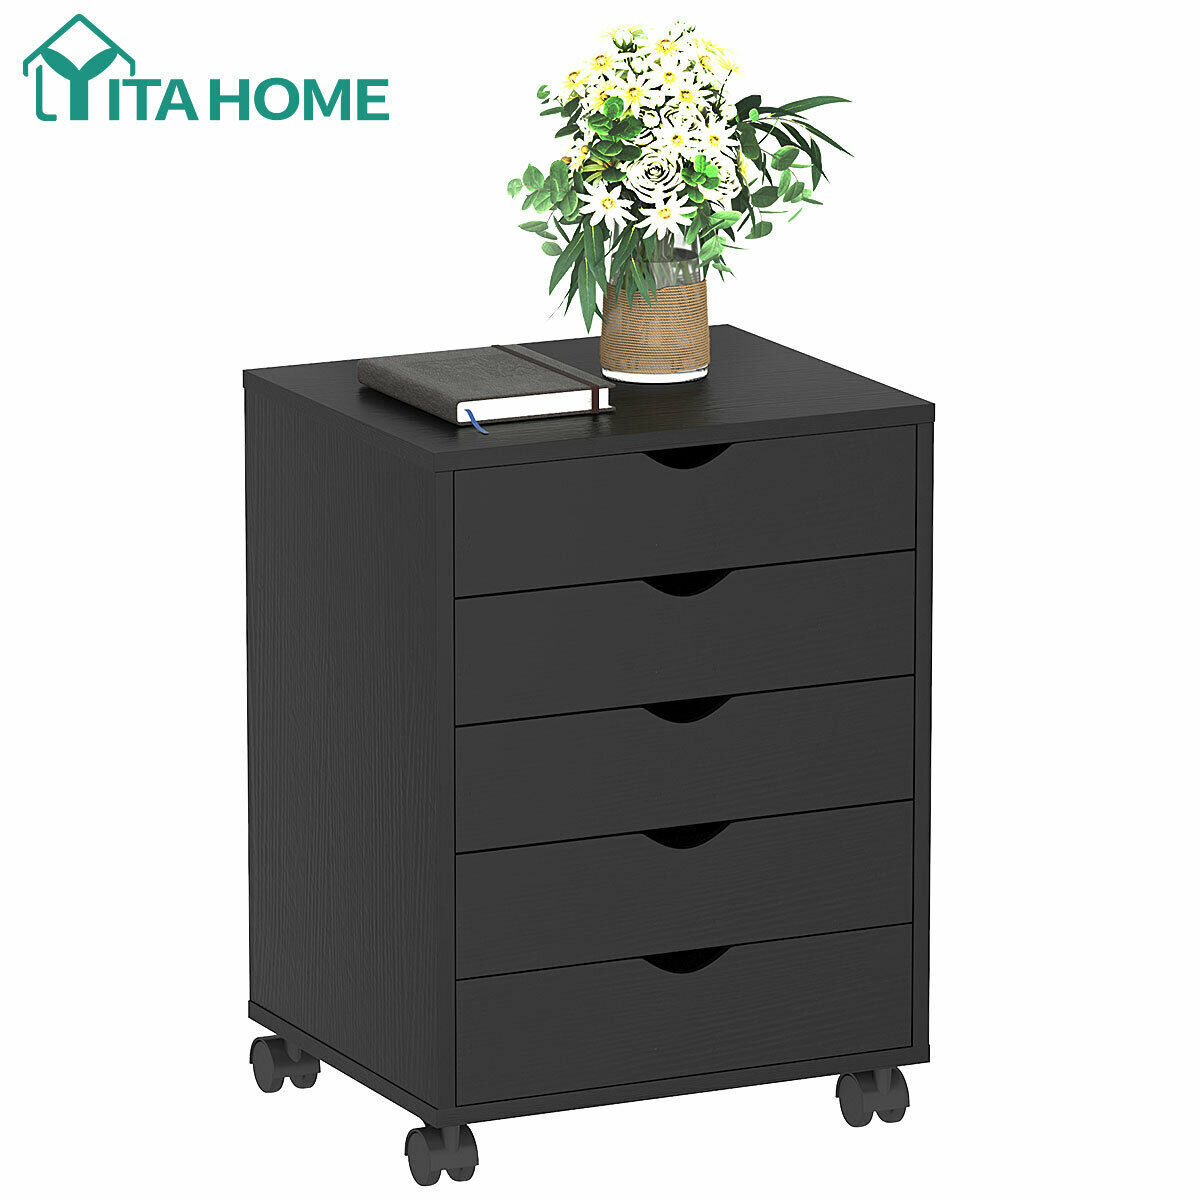 Wood Filing Storage Cart Organizer with Lockable Casters for Home and Office Black SUPER DEAL 5 Drawer Mobile Cabinet